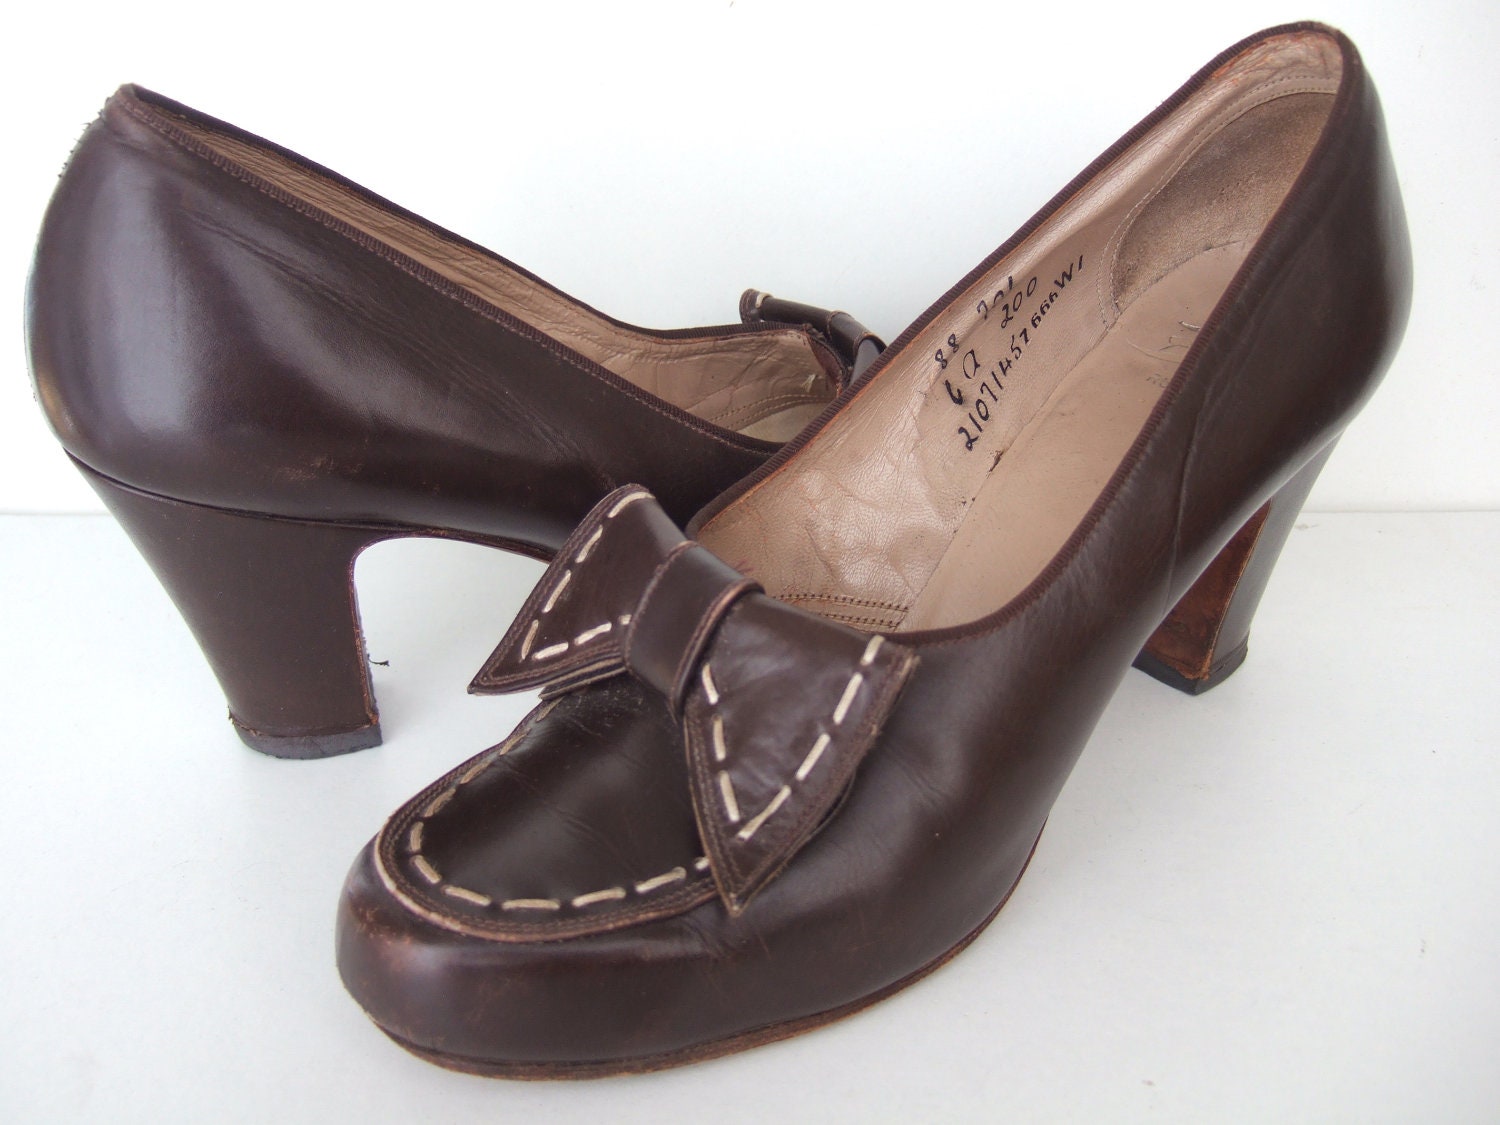 Vintage 40s brown leather court shoes pumps with cuban heels